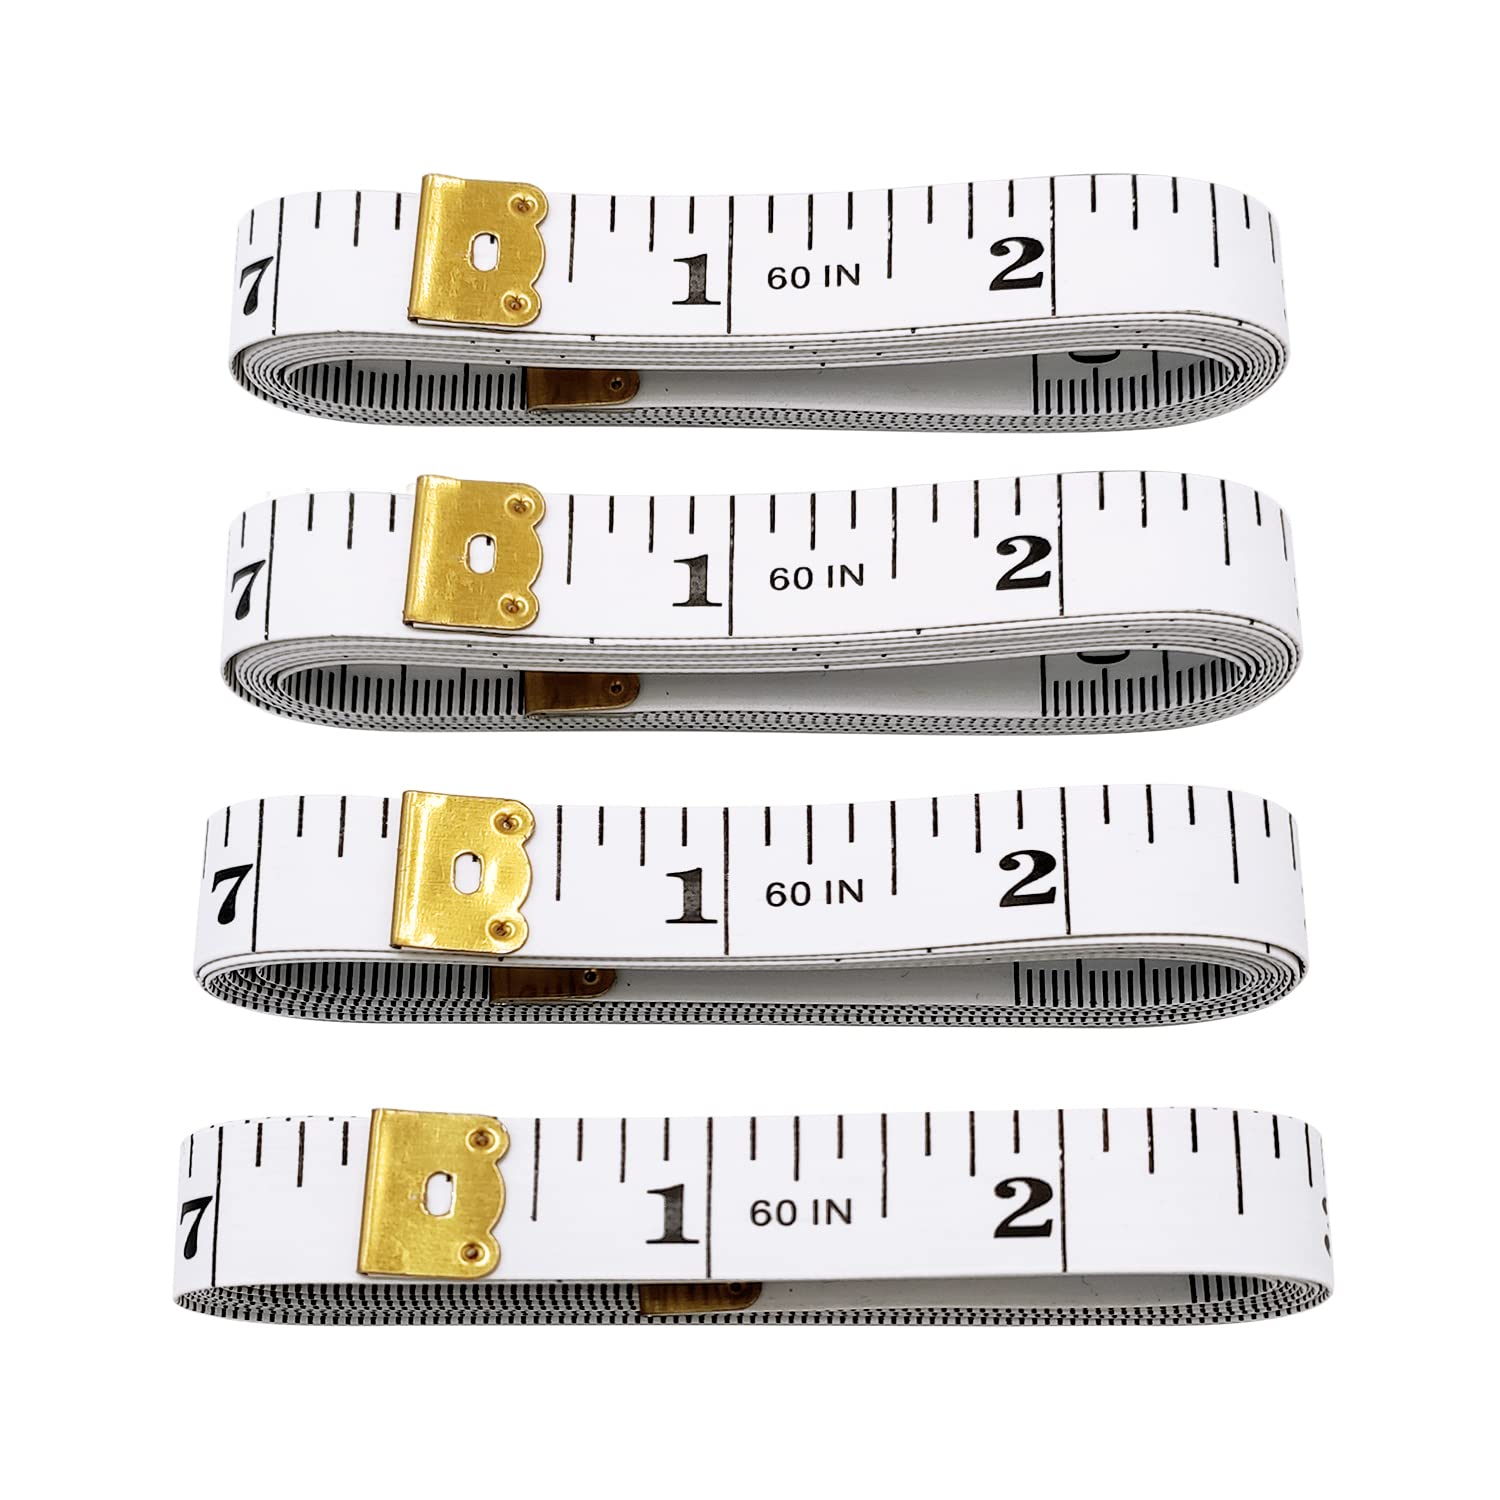 TR-16F - 60 Fractional Tailor's Tape Measure (White) For Sale